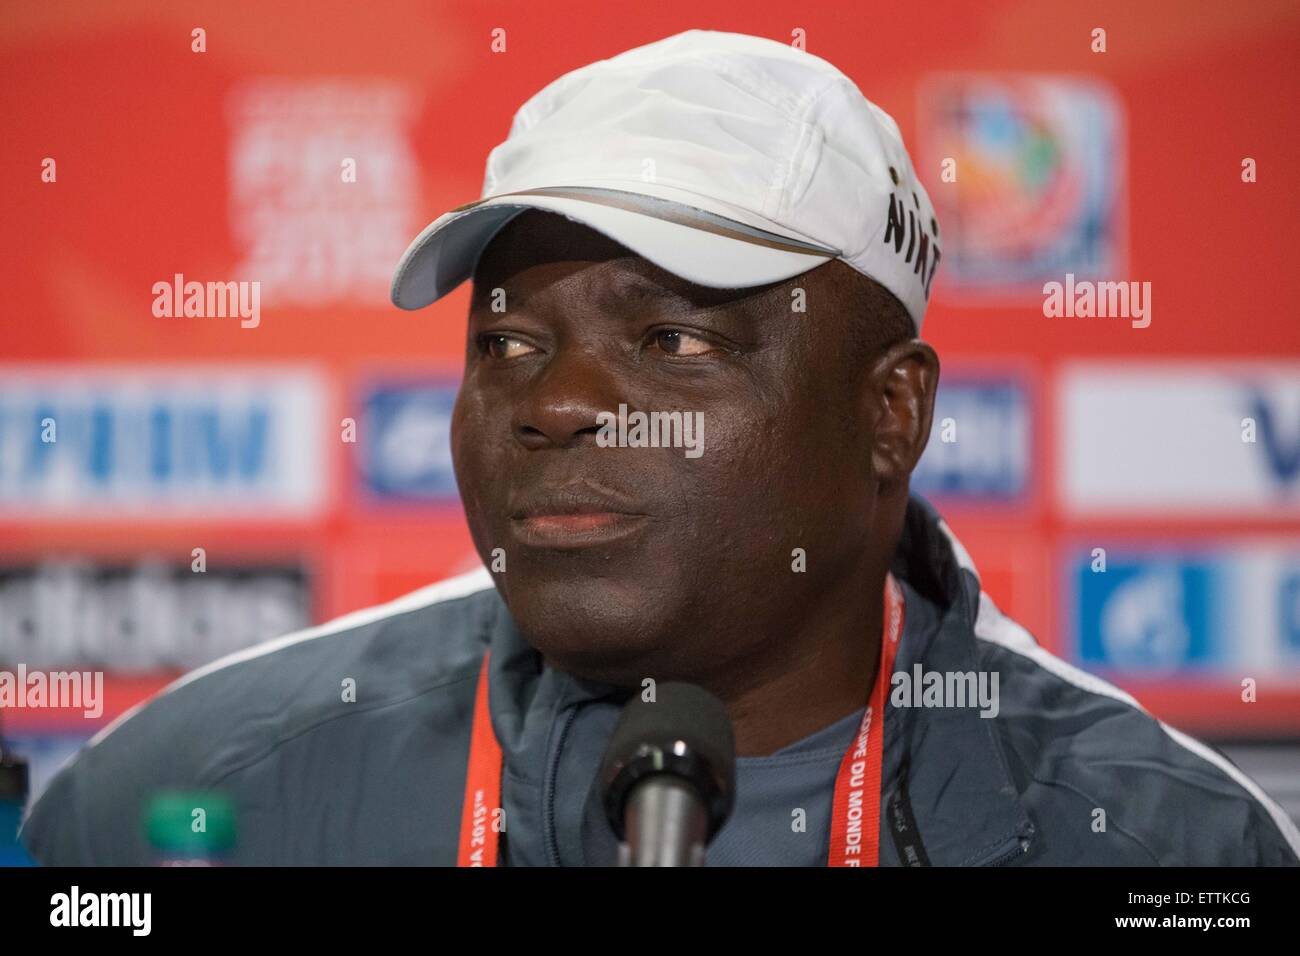 Vancouver, Canada. 15th June, 2015. Edwin OKON coach of the Nigerian team at a press conference prior to a Group D match at the FIFA Women's World Cup Canada 2015 between Nigeria and the USA at BC Place Stadium on 16 June 2015 in Vancouver, Canada. Sydney Low/Cal Sport Media.June 15, 2015: at a press conference prior to a Group D match at the FIFA Women's World Cup Canada 2015 between Nigeria and the USA at BC Place Stadium on 16 June 2015 in Vancouver, Canada. Sydney Low/Cal Sport Media. Credit:  csm/Alamy Live News Stock Photo